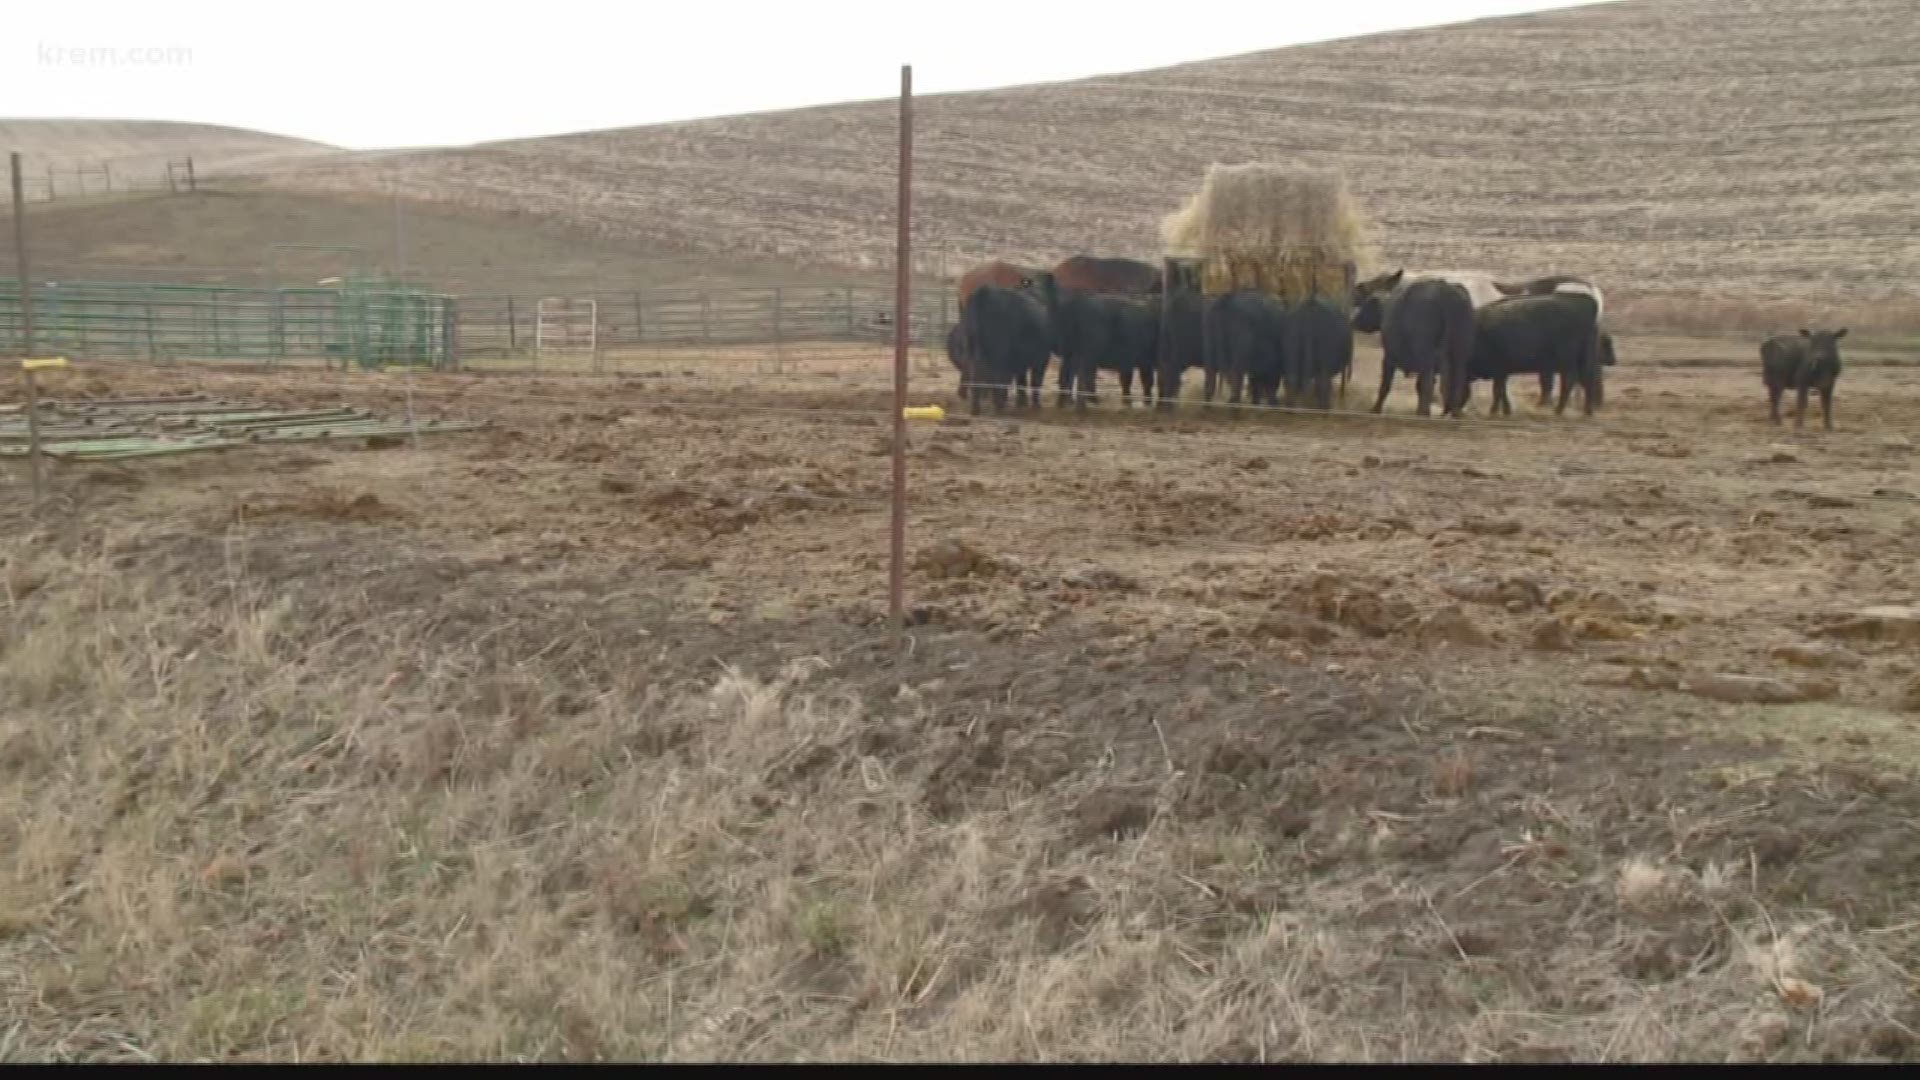 A Spangle man is offering a reward for information on who killed two of his calves over the weekend. The two killed calves were six-months-old.